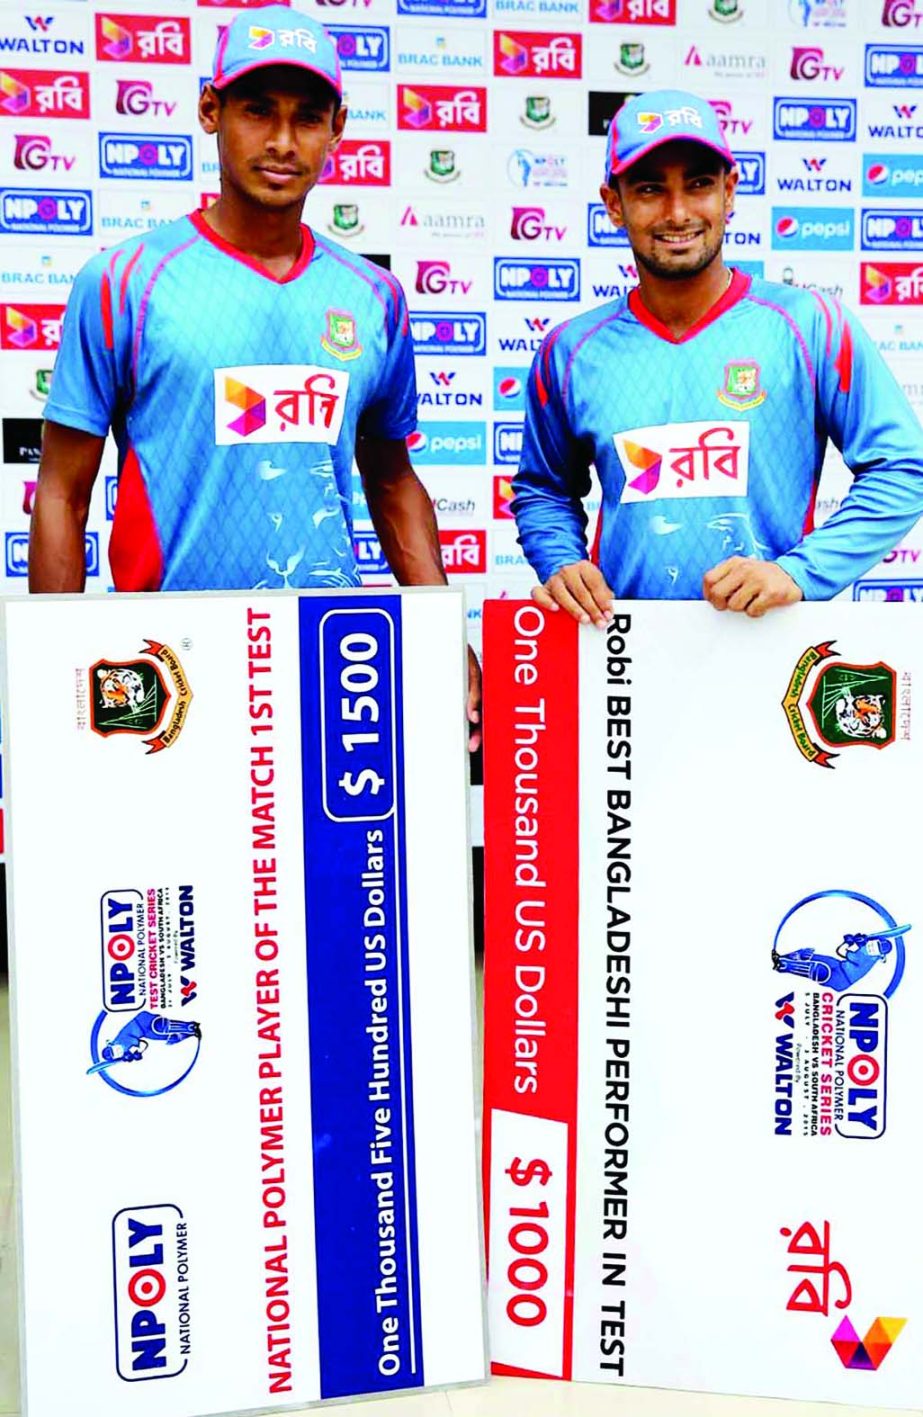 Mustafizur Rahman (left) with his Man of the Match award and Liton Das with his Robi Best Player award pose for a photo session at the Zahur Ahmed Chowdhury Stadium in Chittagong on Saturday. The first Test match between Bangladesh and South Africa ended